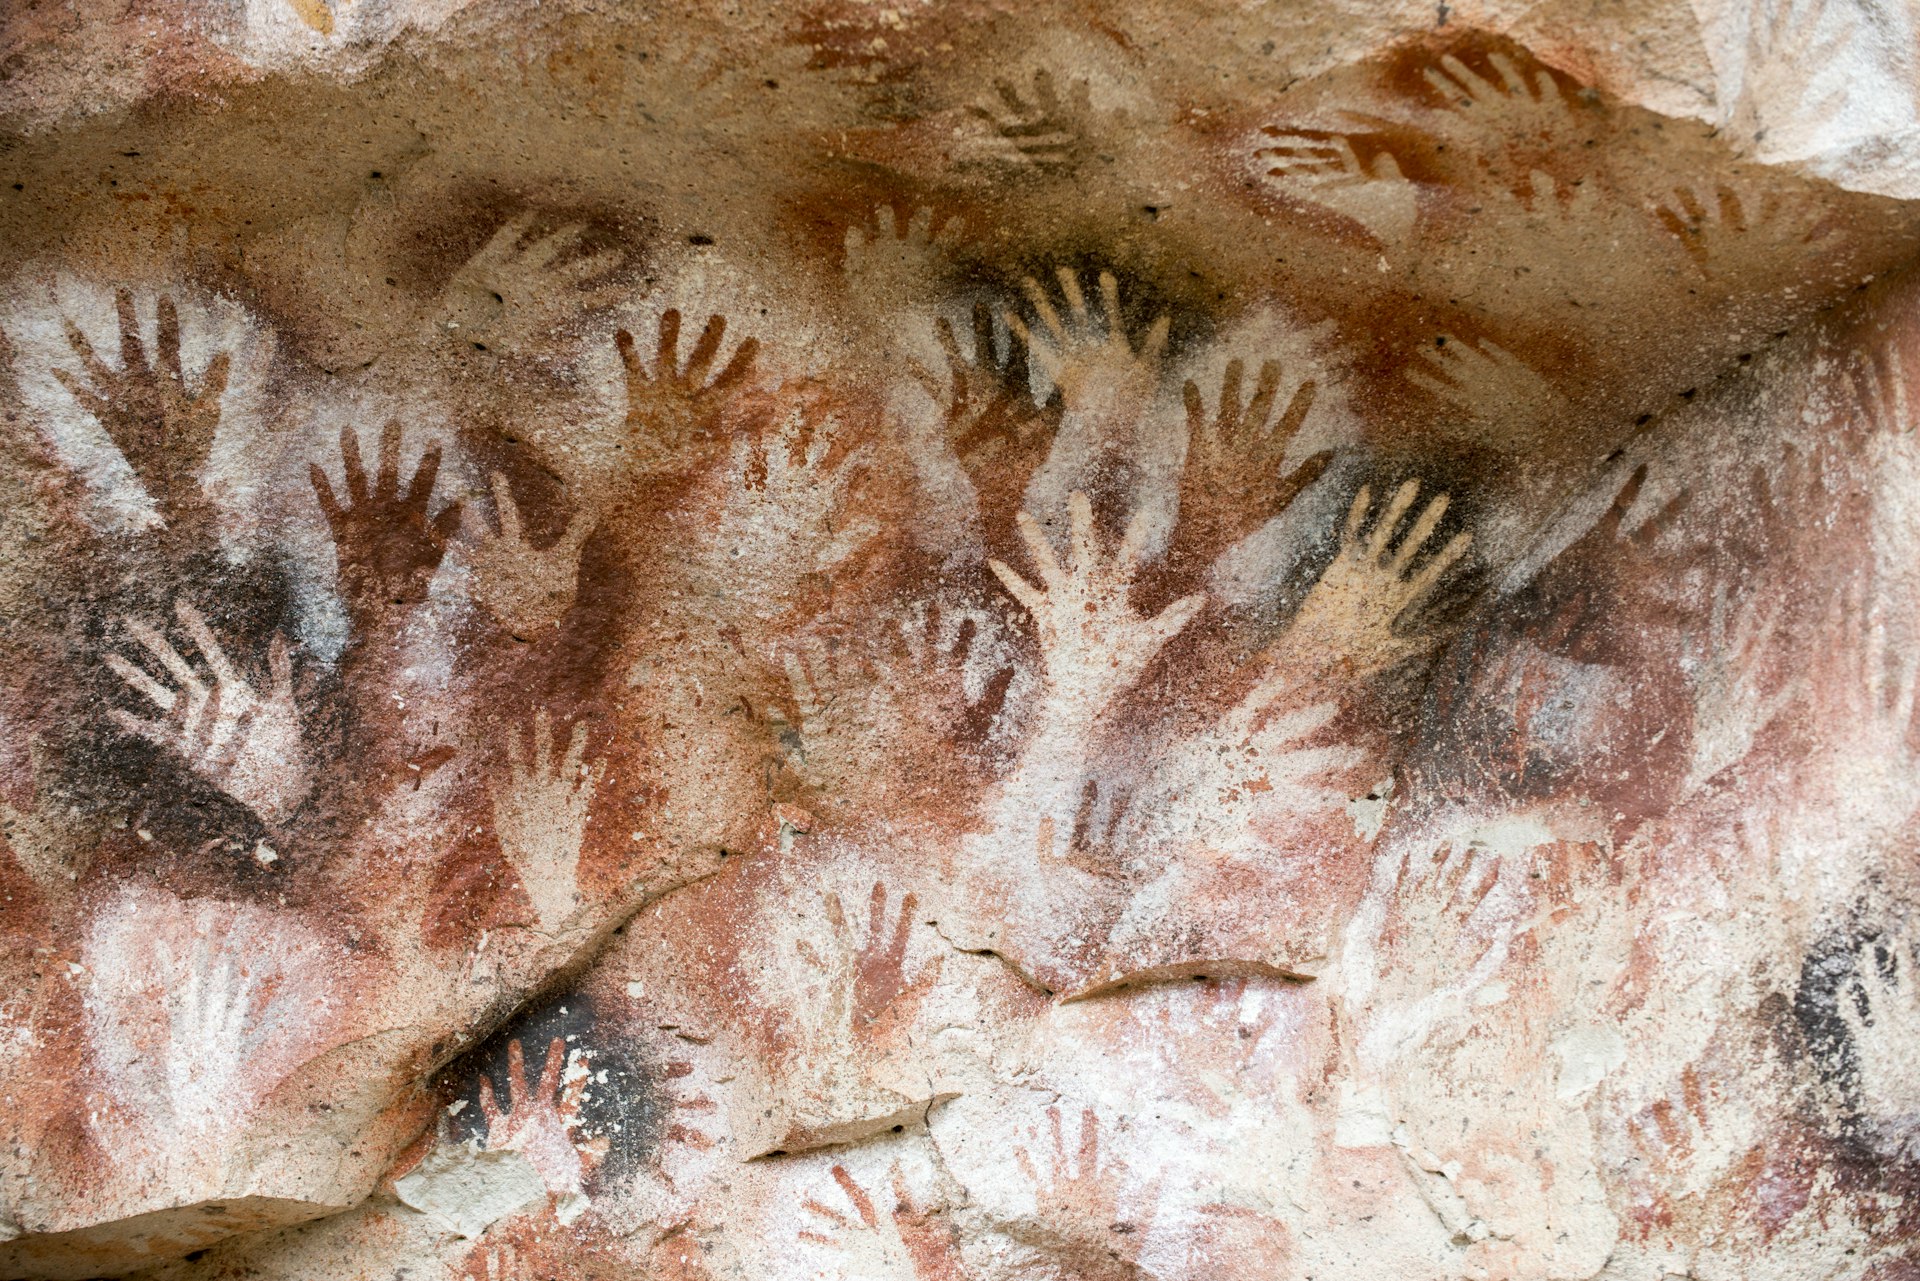 Scores of hands painted in reds, yellows and blacks in a cave that make up Argentina's oldest rock art at Cueva de las Manos, dating from 6370 BC.